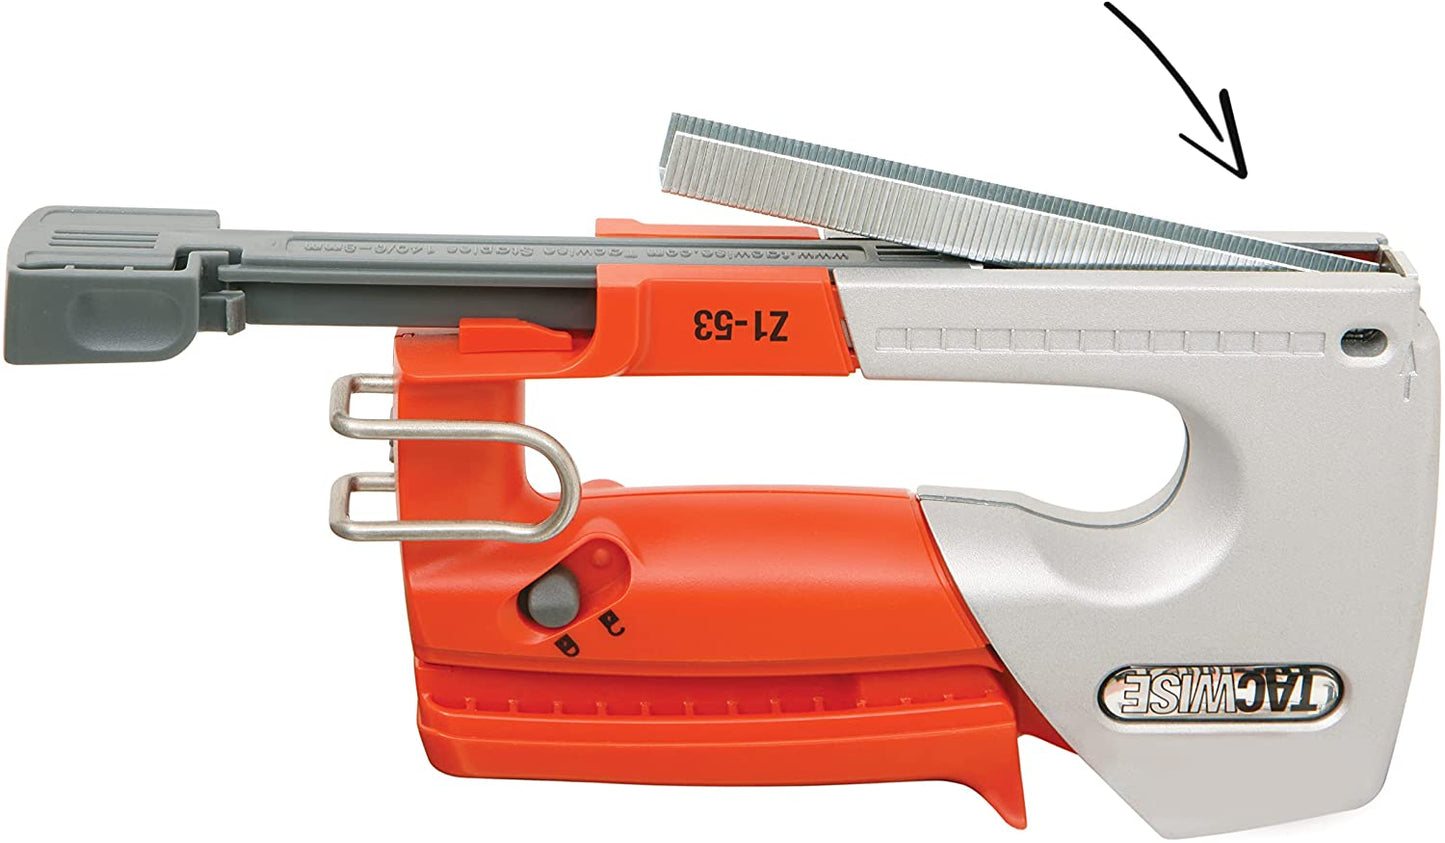 Tacwise 0889 Z1-53 Heavy Duty Metal Staple Gun with 200 Staples, Staple Remover